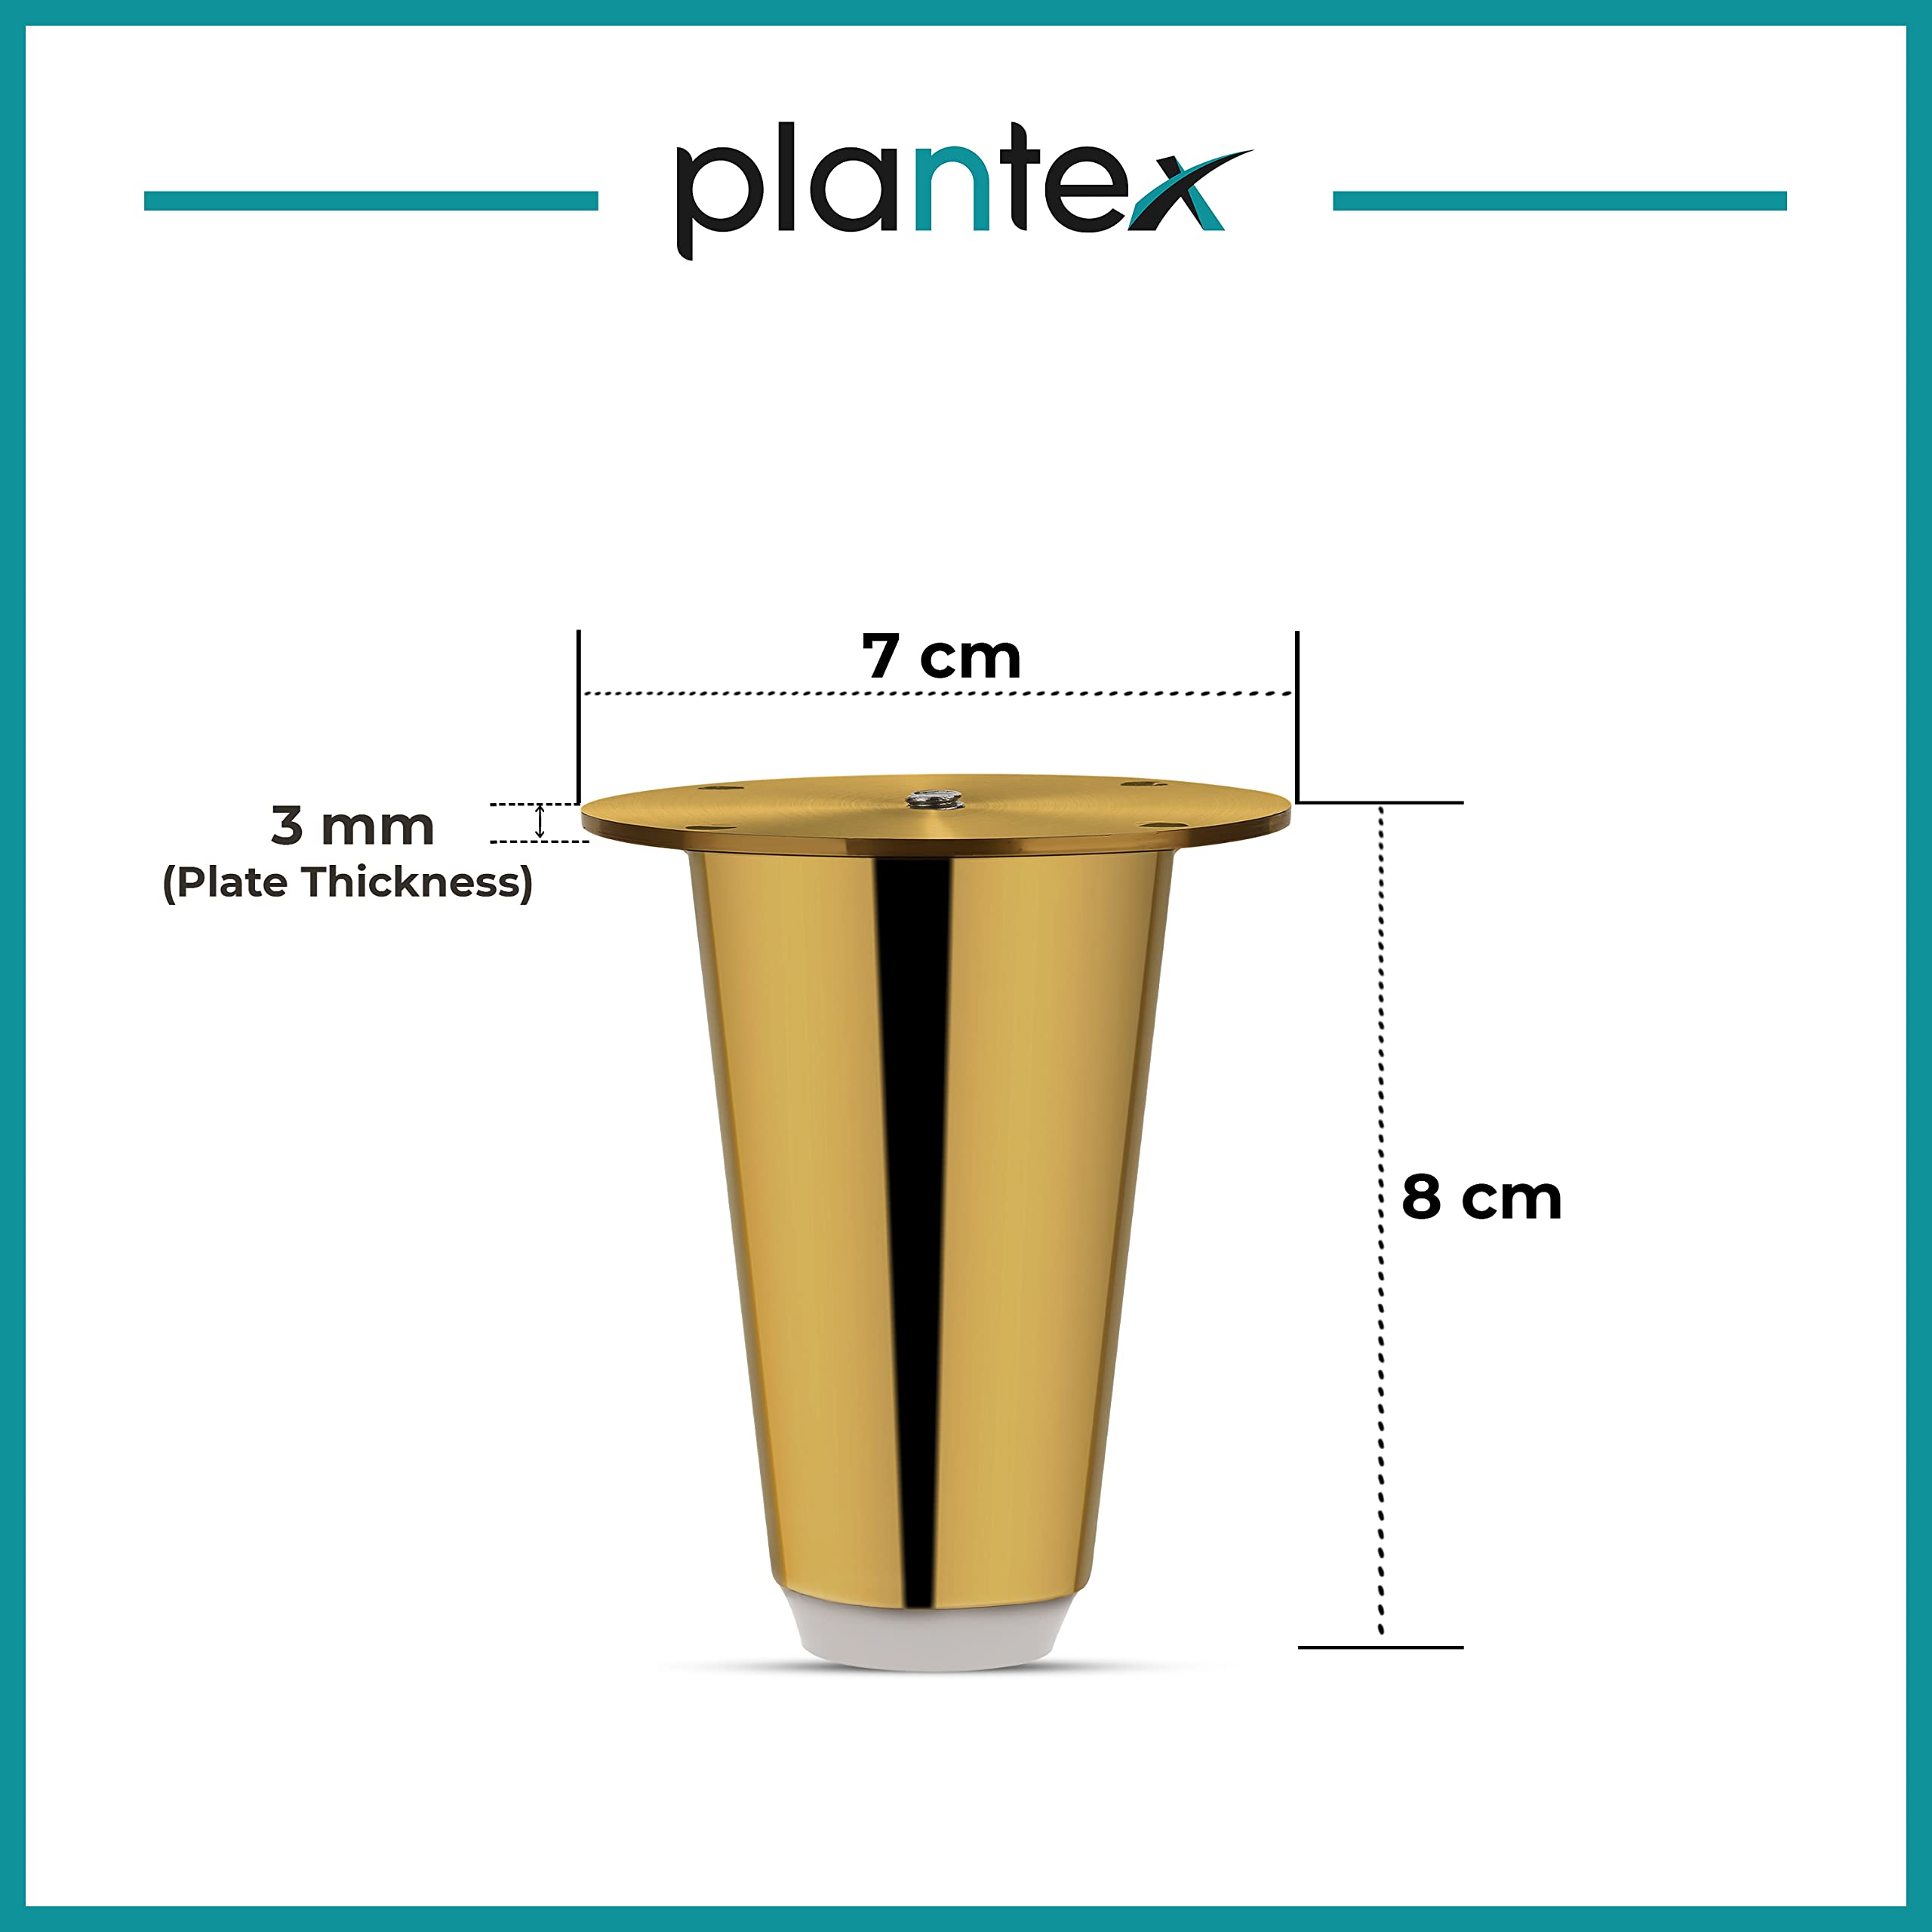 Plantex Heavy Duty Stainless Steel 3 inch Sofa Leg/Bed Furniture Leg Pair for Home Furnitures (DTS-53, Gold) – 8 Pcs